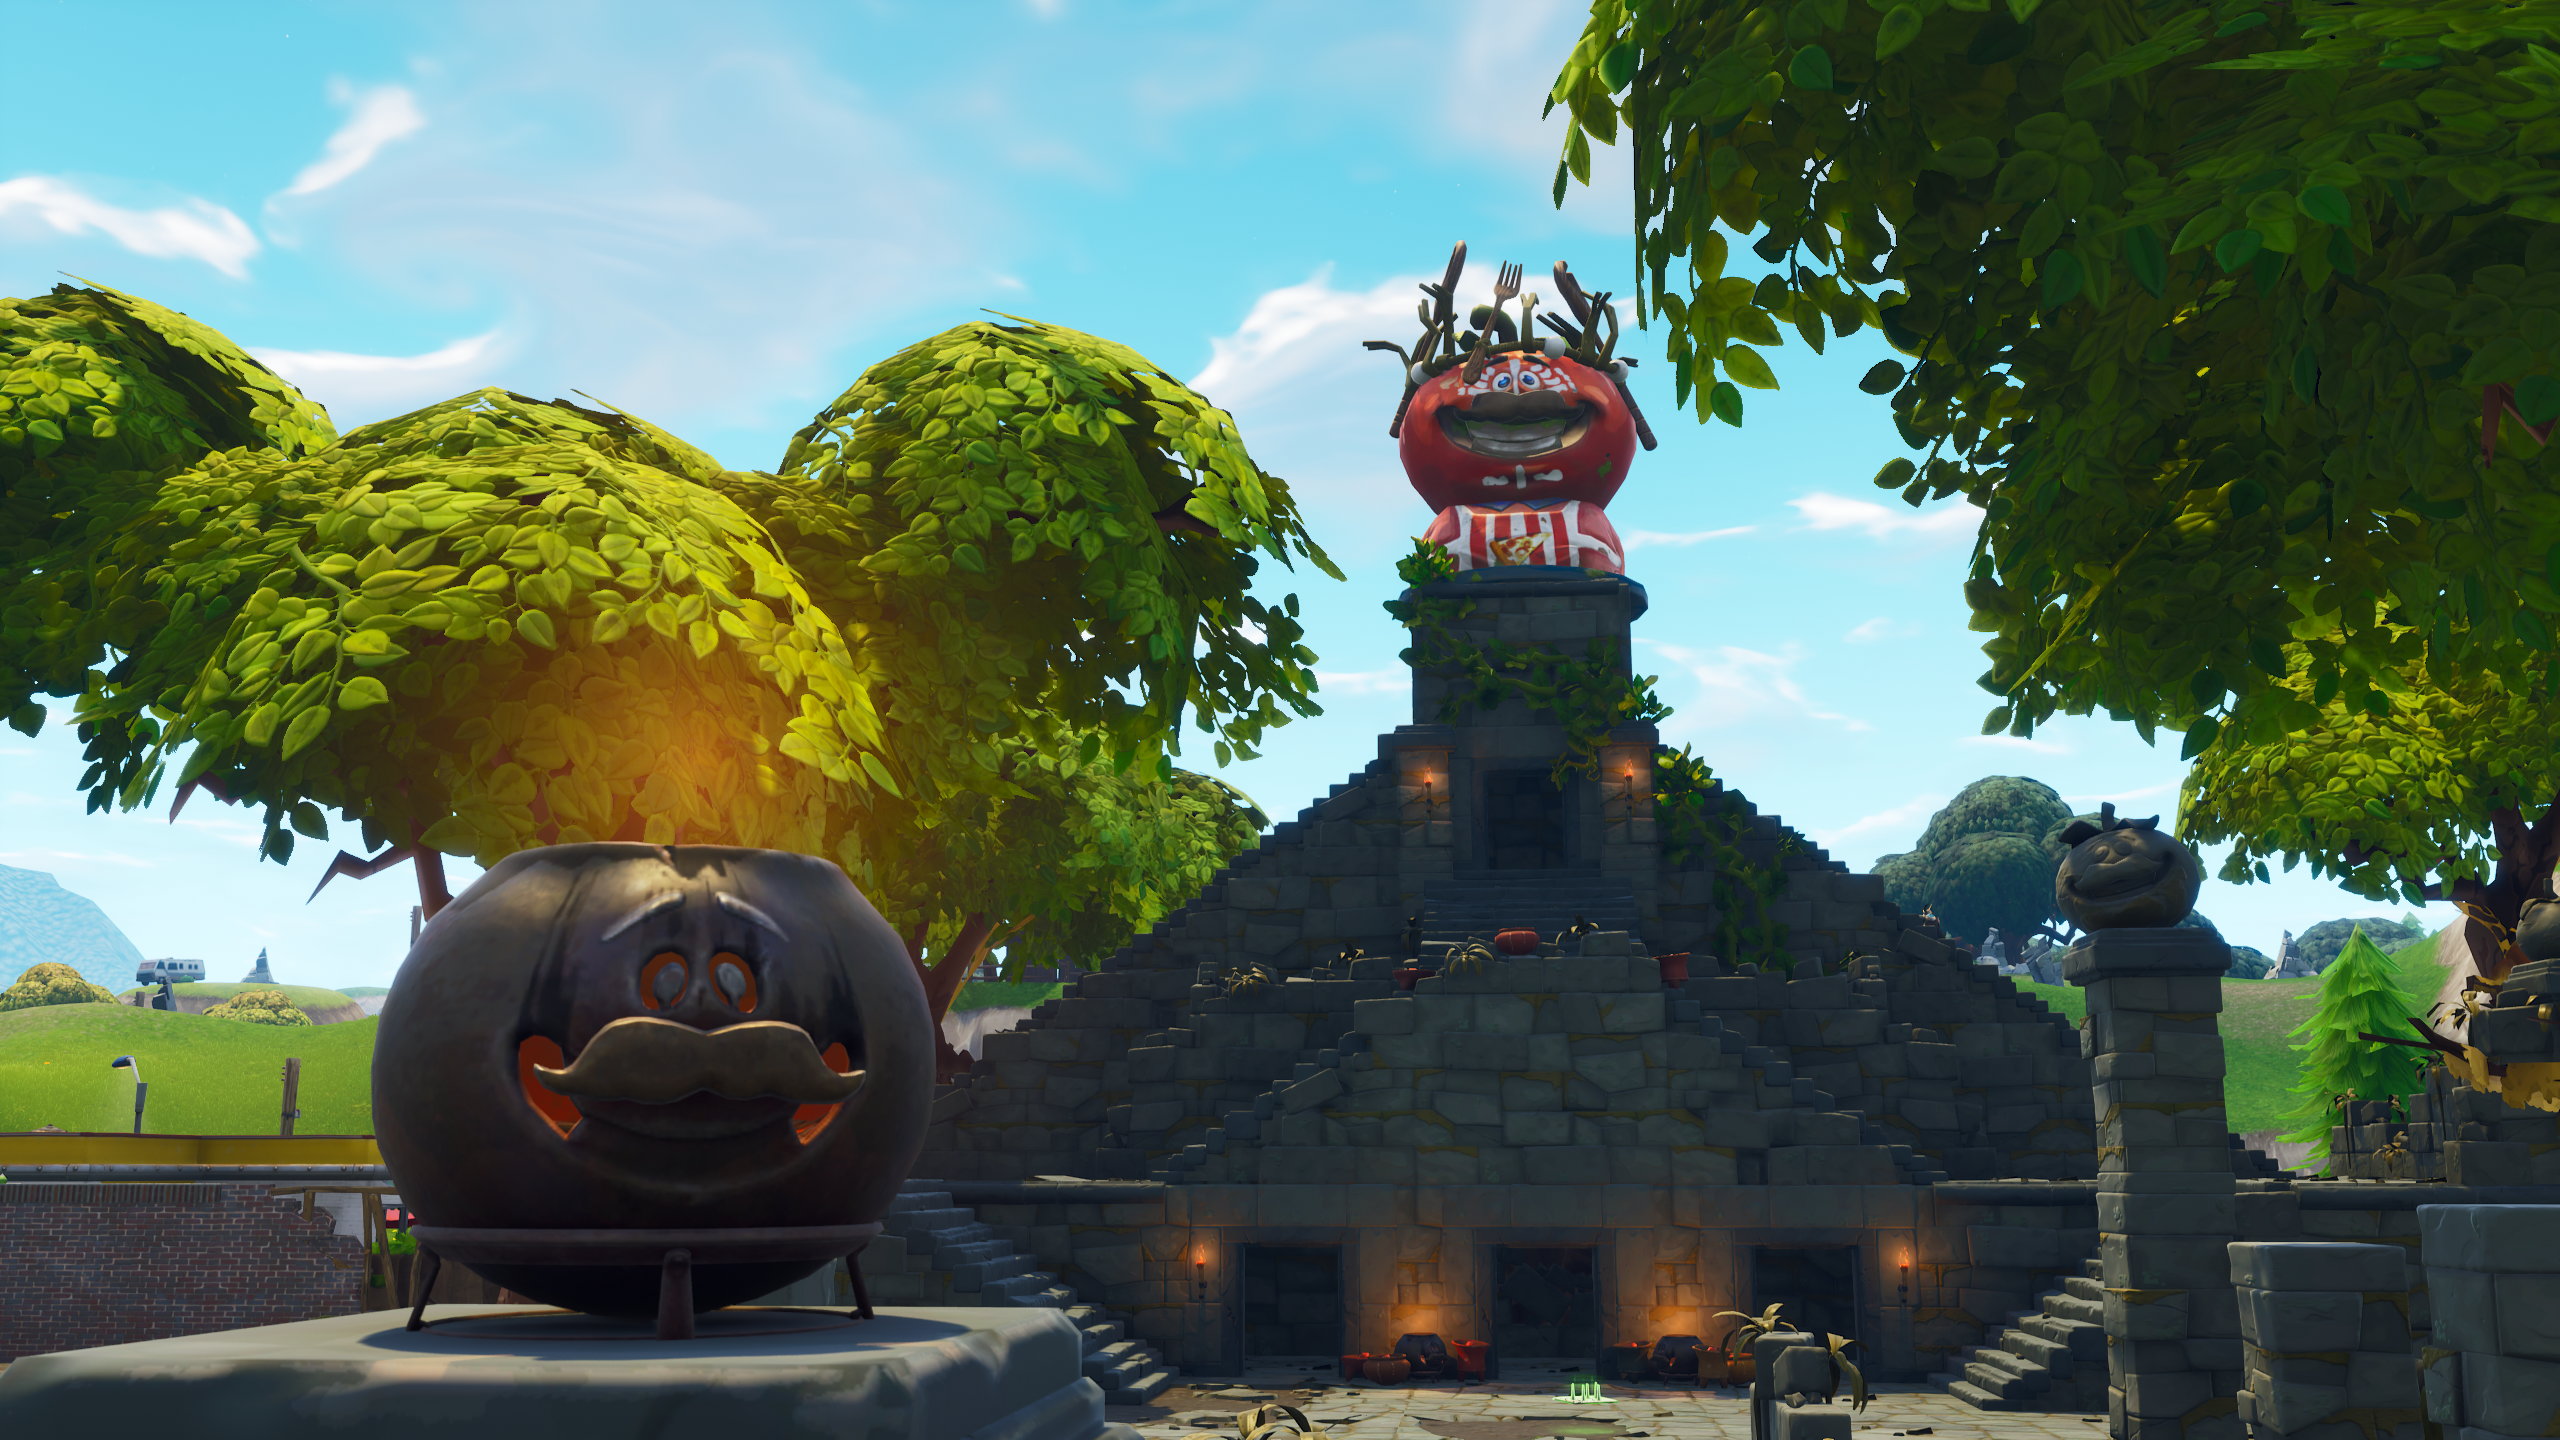 Tamato Event Fortnite Tomato Temple Is Getting Another Event On August 27